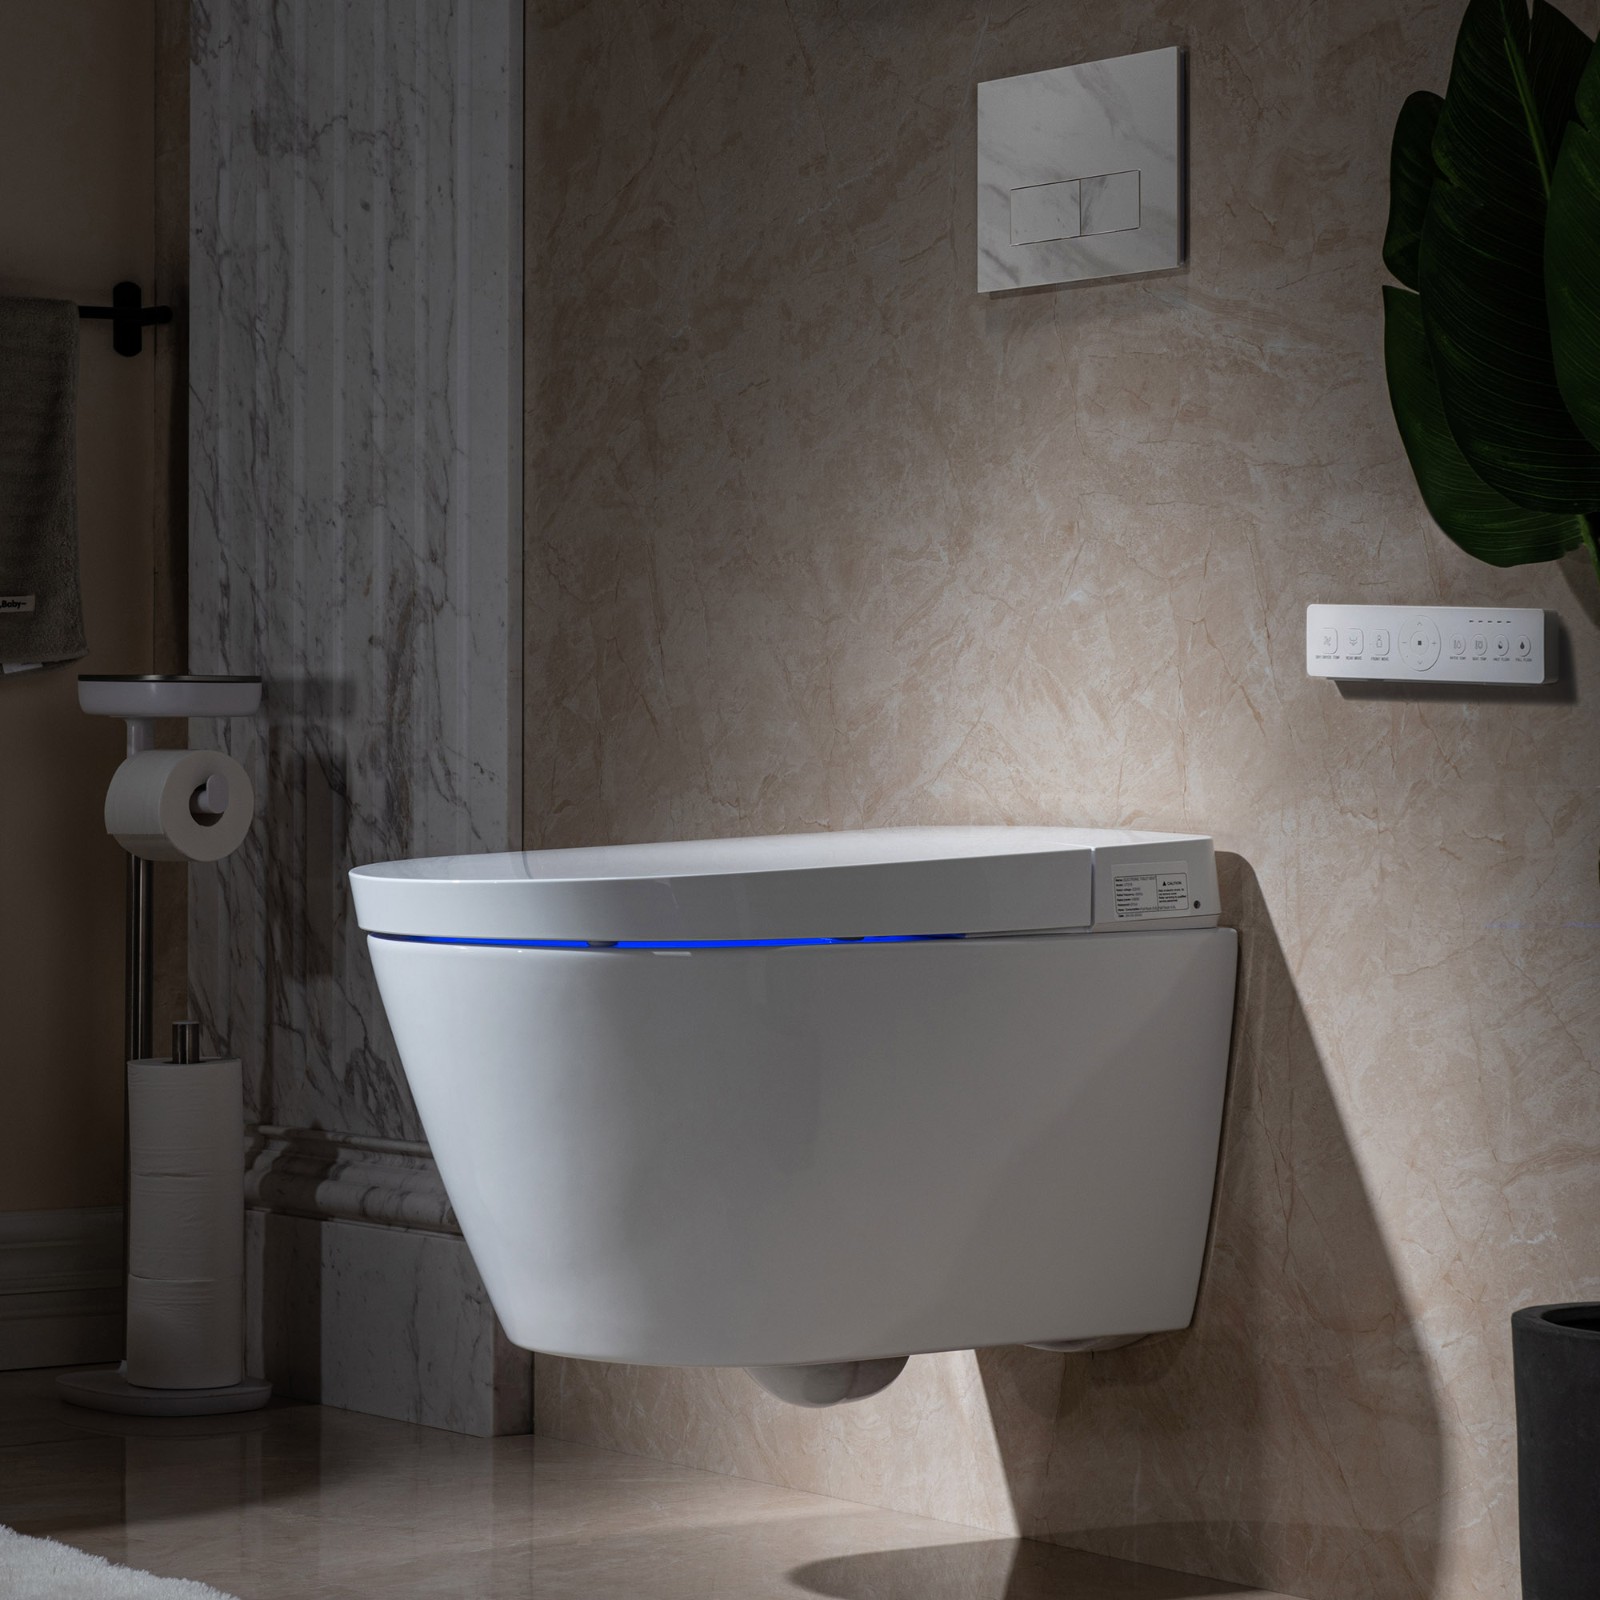  WOODBRIDGE  Intelligent Compact Elongated Dual-flush wall hung toilet with Bidet Wash Function, Heated Seat & Dryer. Matching Concealed Tank system and White Marble Stone Slim Flush Plates Included.LT611 + SWHT611+FP611-WH_550